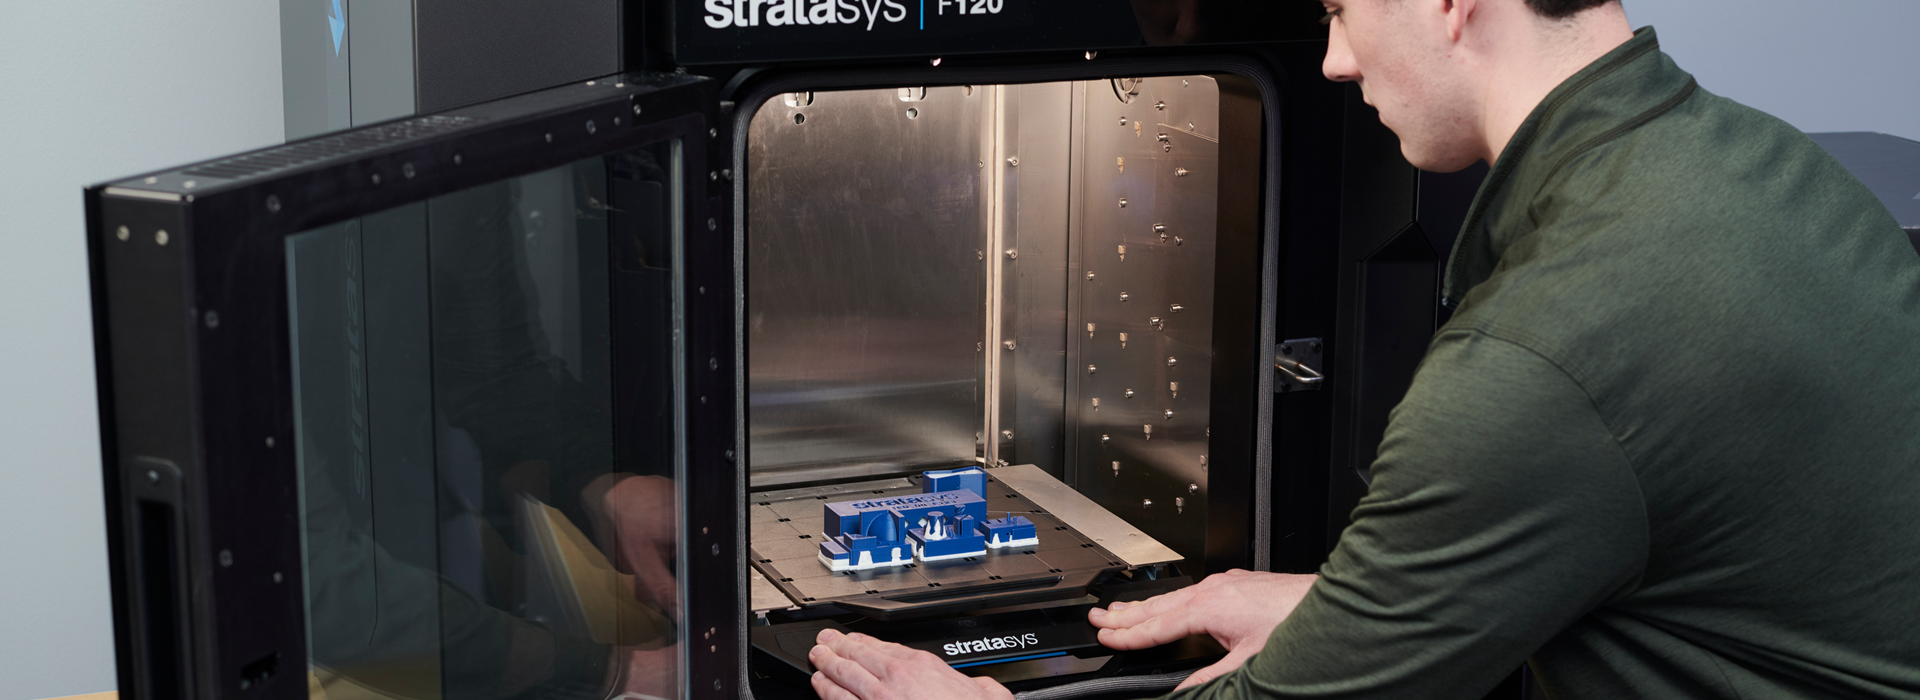 An introduction to Stratasys F120 3D printer. 